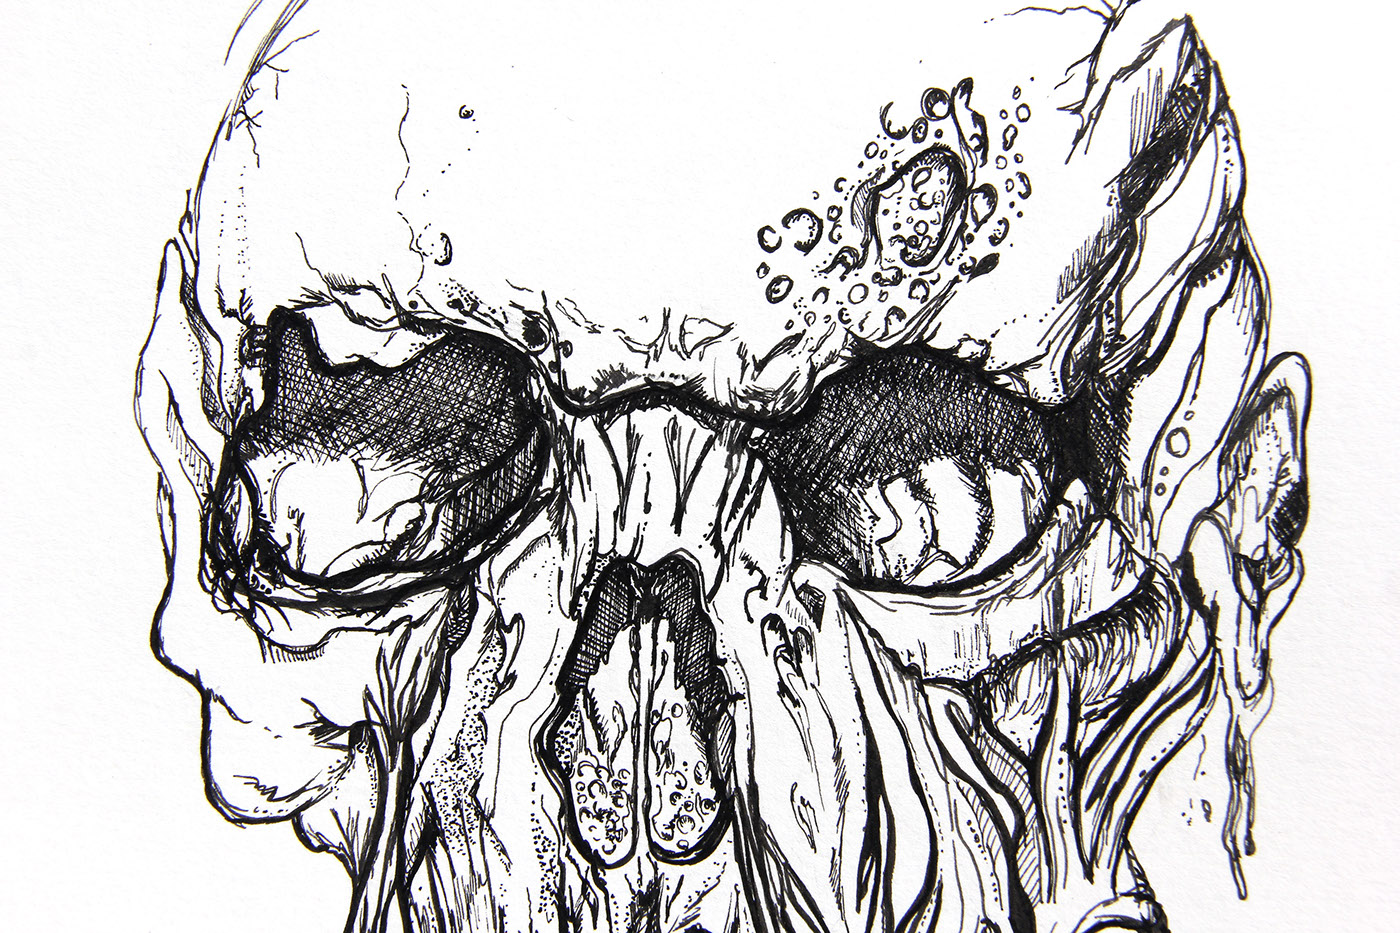 ink grotesque Unreal stylistic Line Work detail Micron Pens black ink watercolor abstract